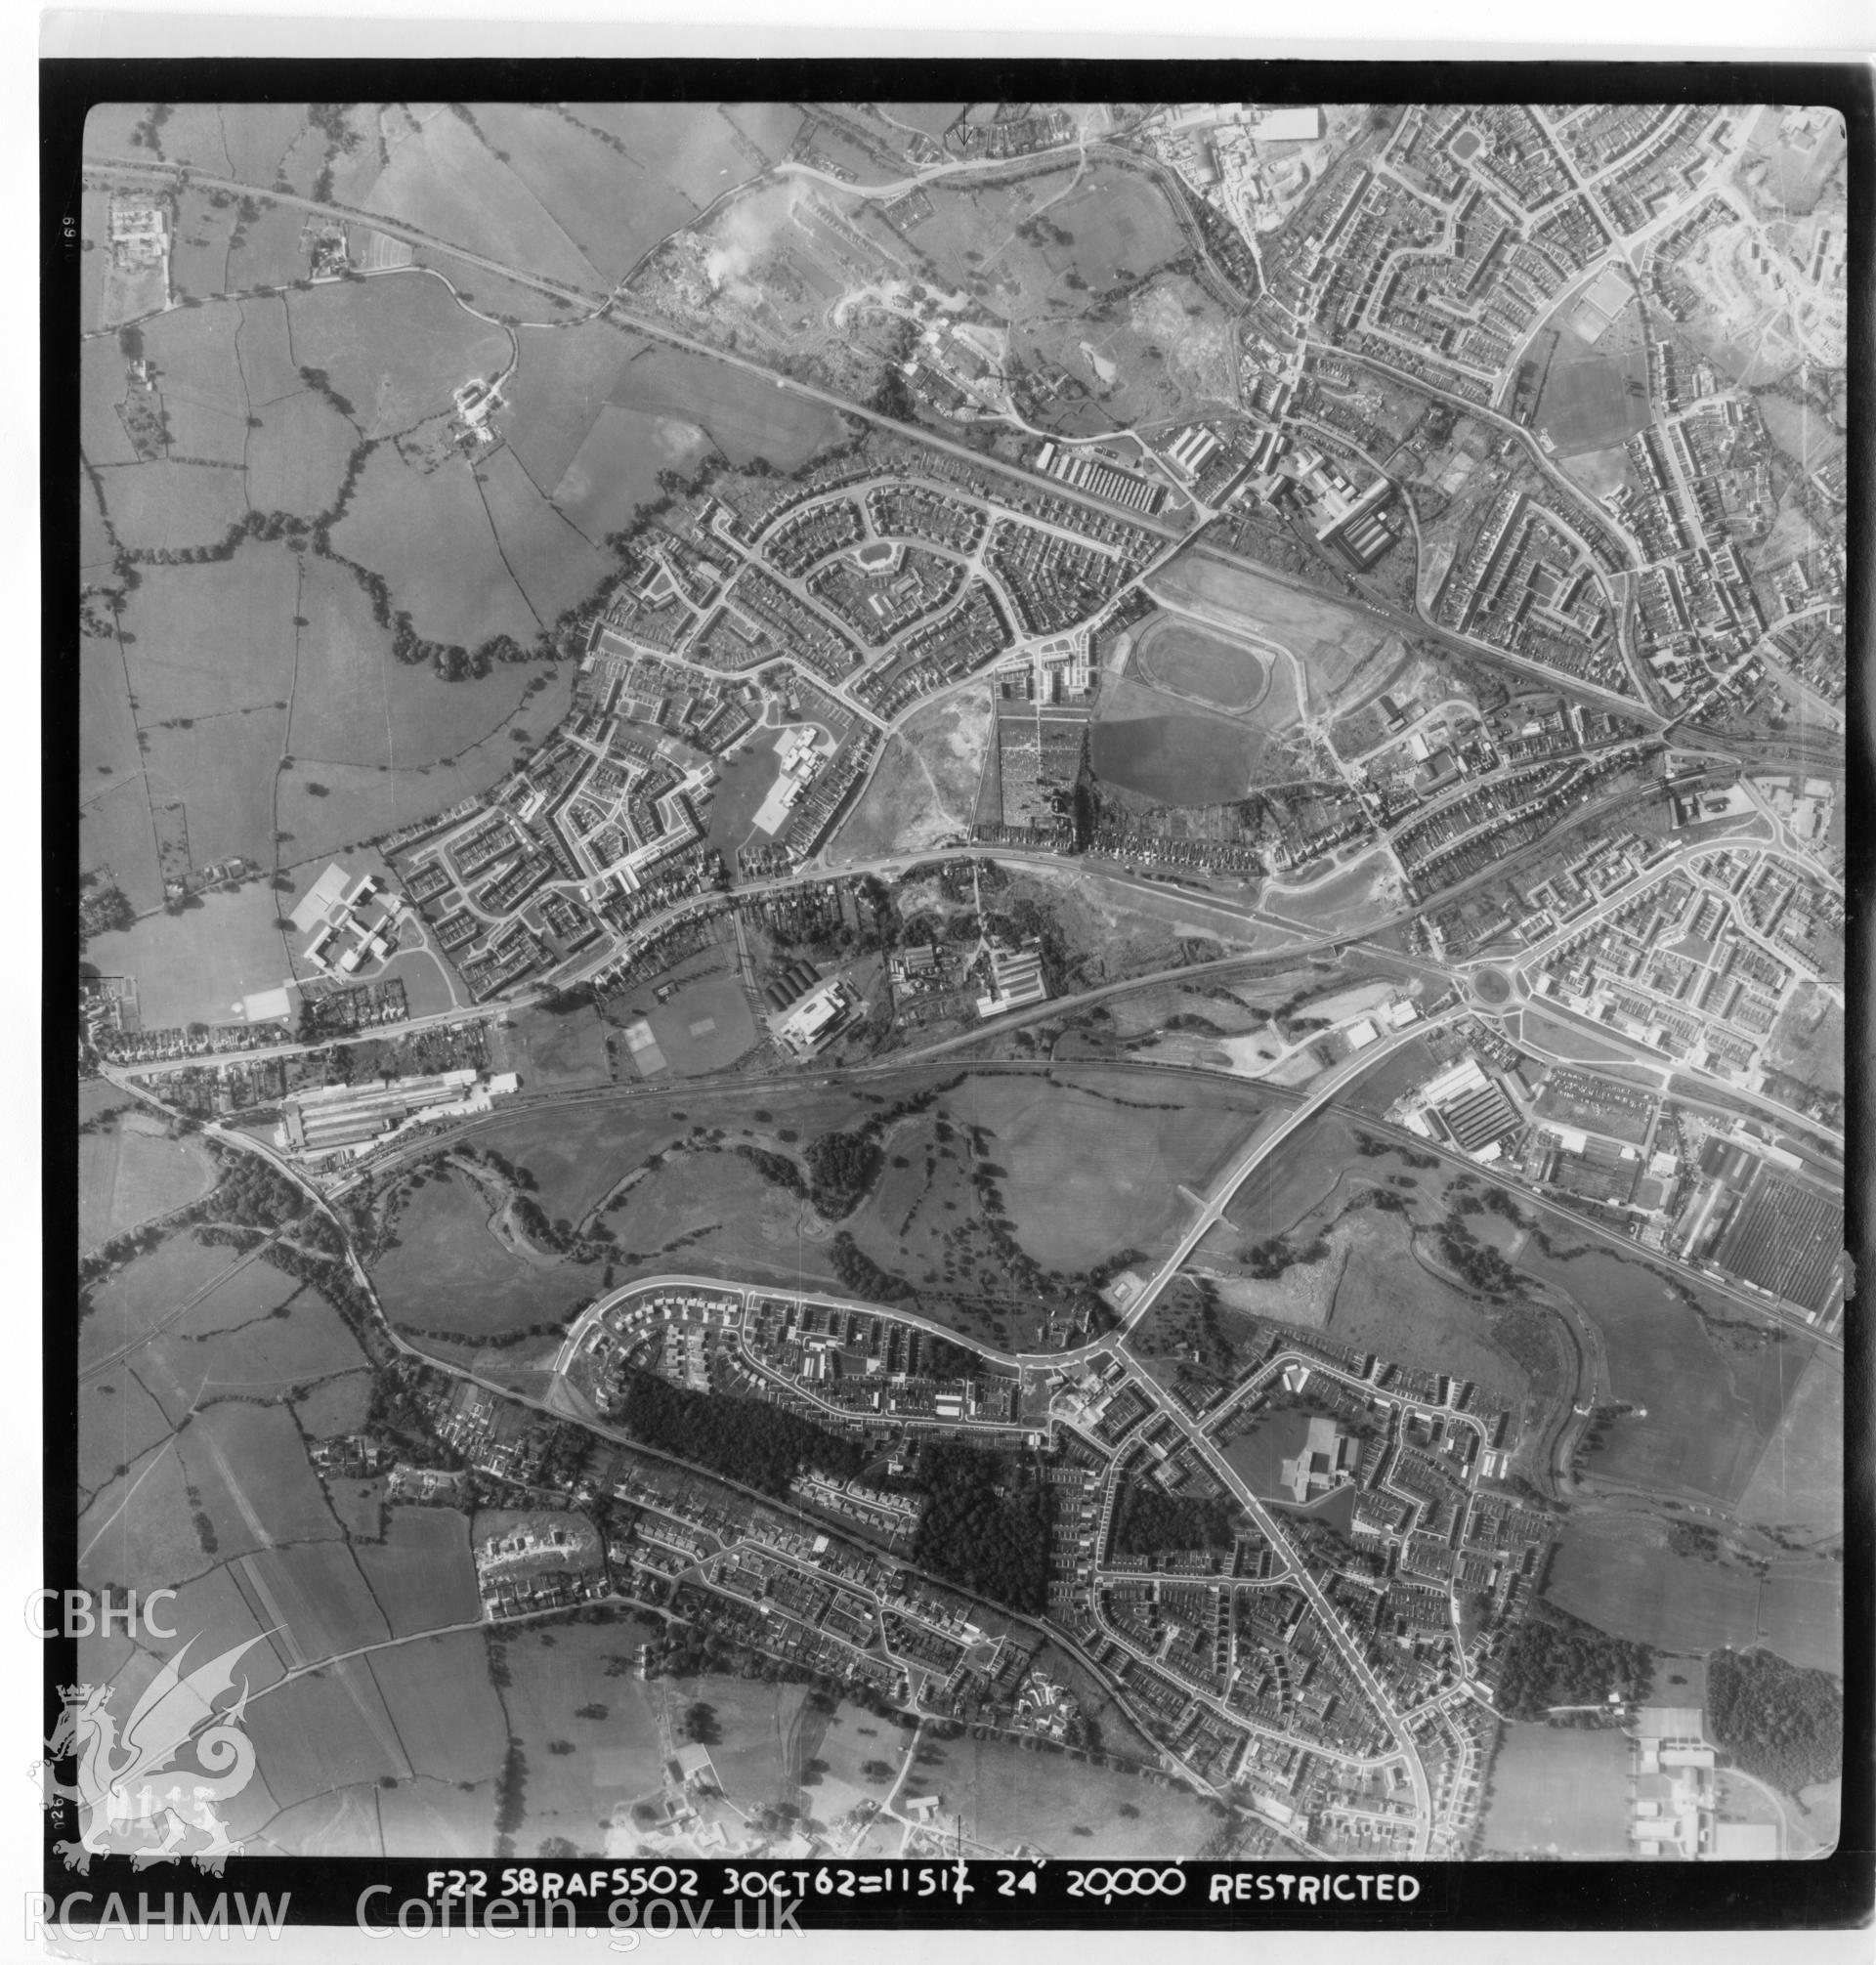 Aerial photograph of Cwmbran, taken on 3rd October 1962. Included as part of Archaeology Wales' desk based assessment of former Llantarnam Community Primary School, Croeswen, Oakfield, Cwmbran, conducted in 2017.